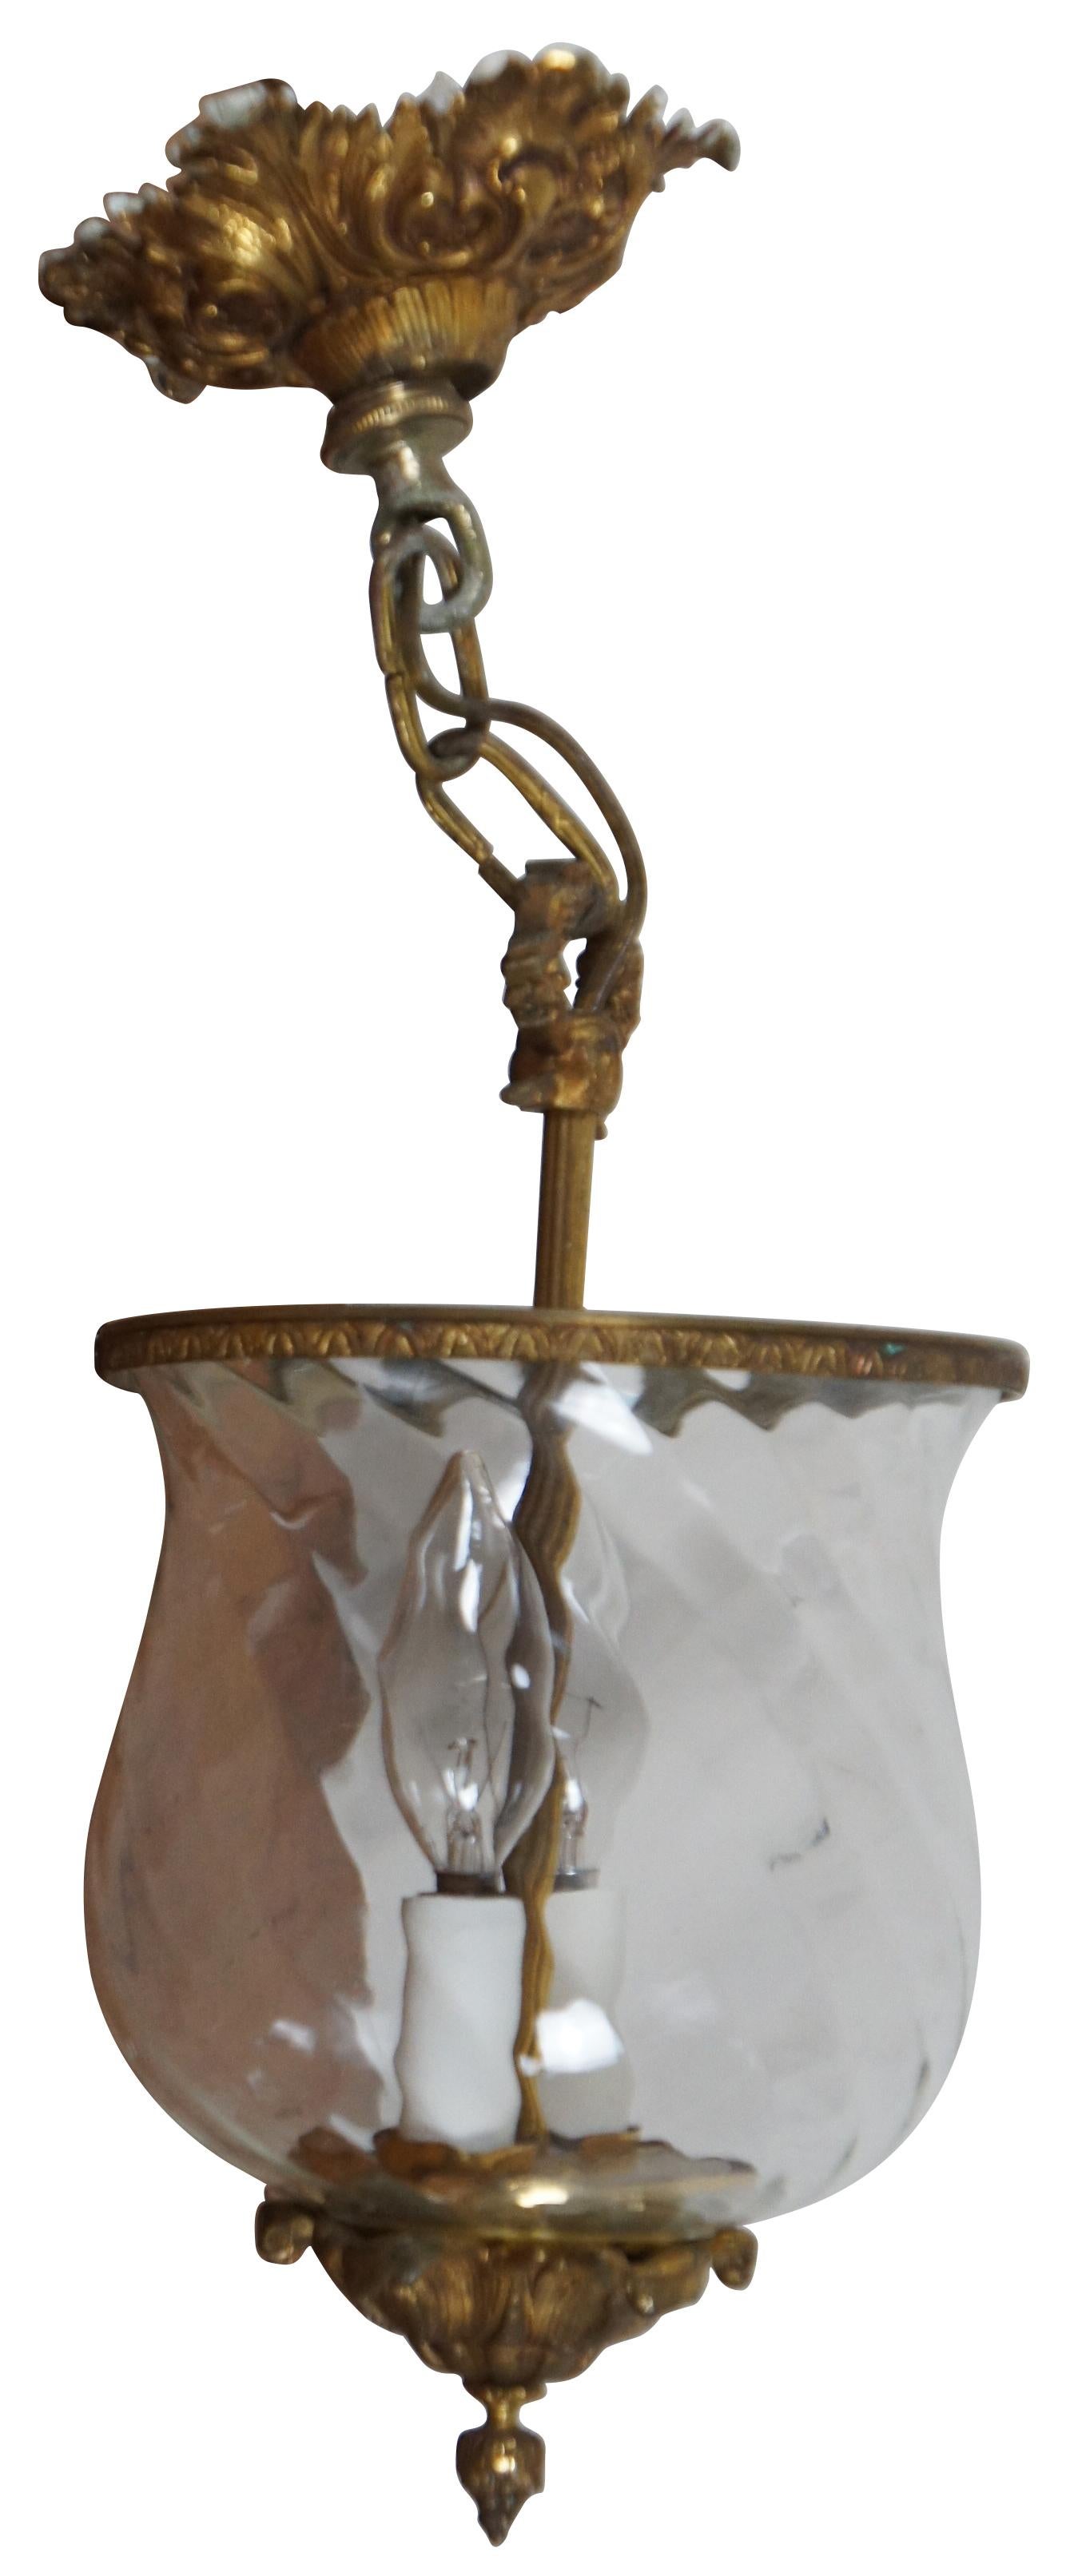 Pair of vintage two light candle bell jar / lantern style pendant lights fashioned of glass hurricanes with a twisted, rippled design, with ornate baroque brass accents. Made in Spain.

Measures: 7.25” x 12” / chain length – 6” (Diameter x Height).